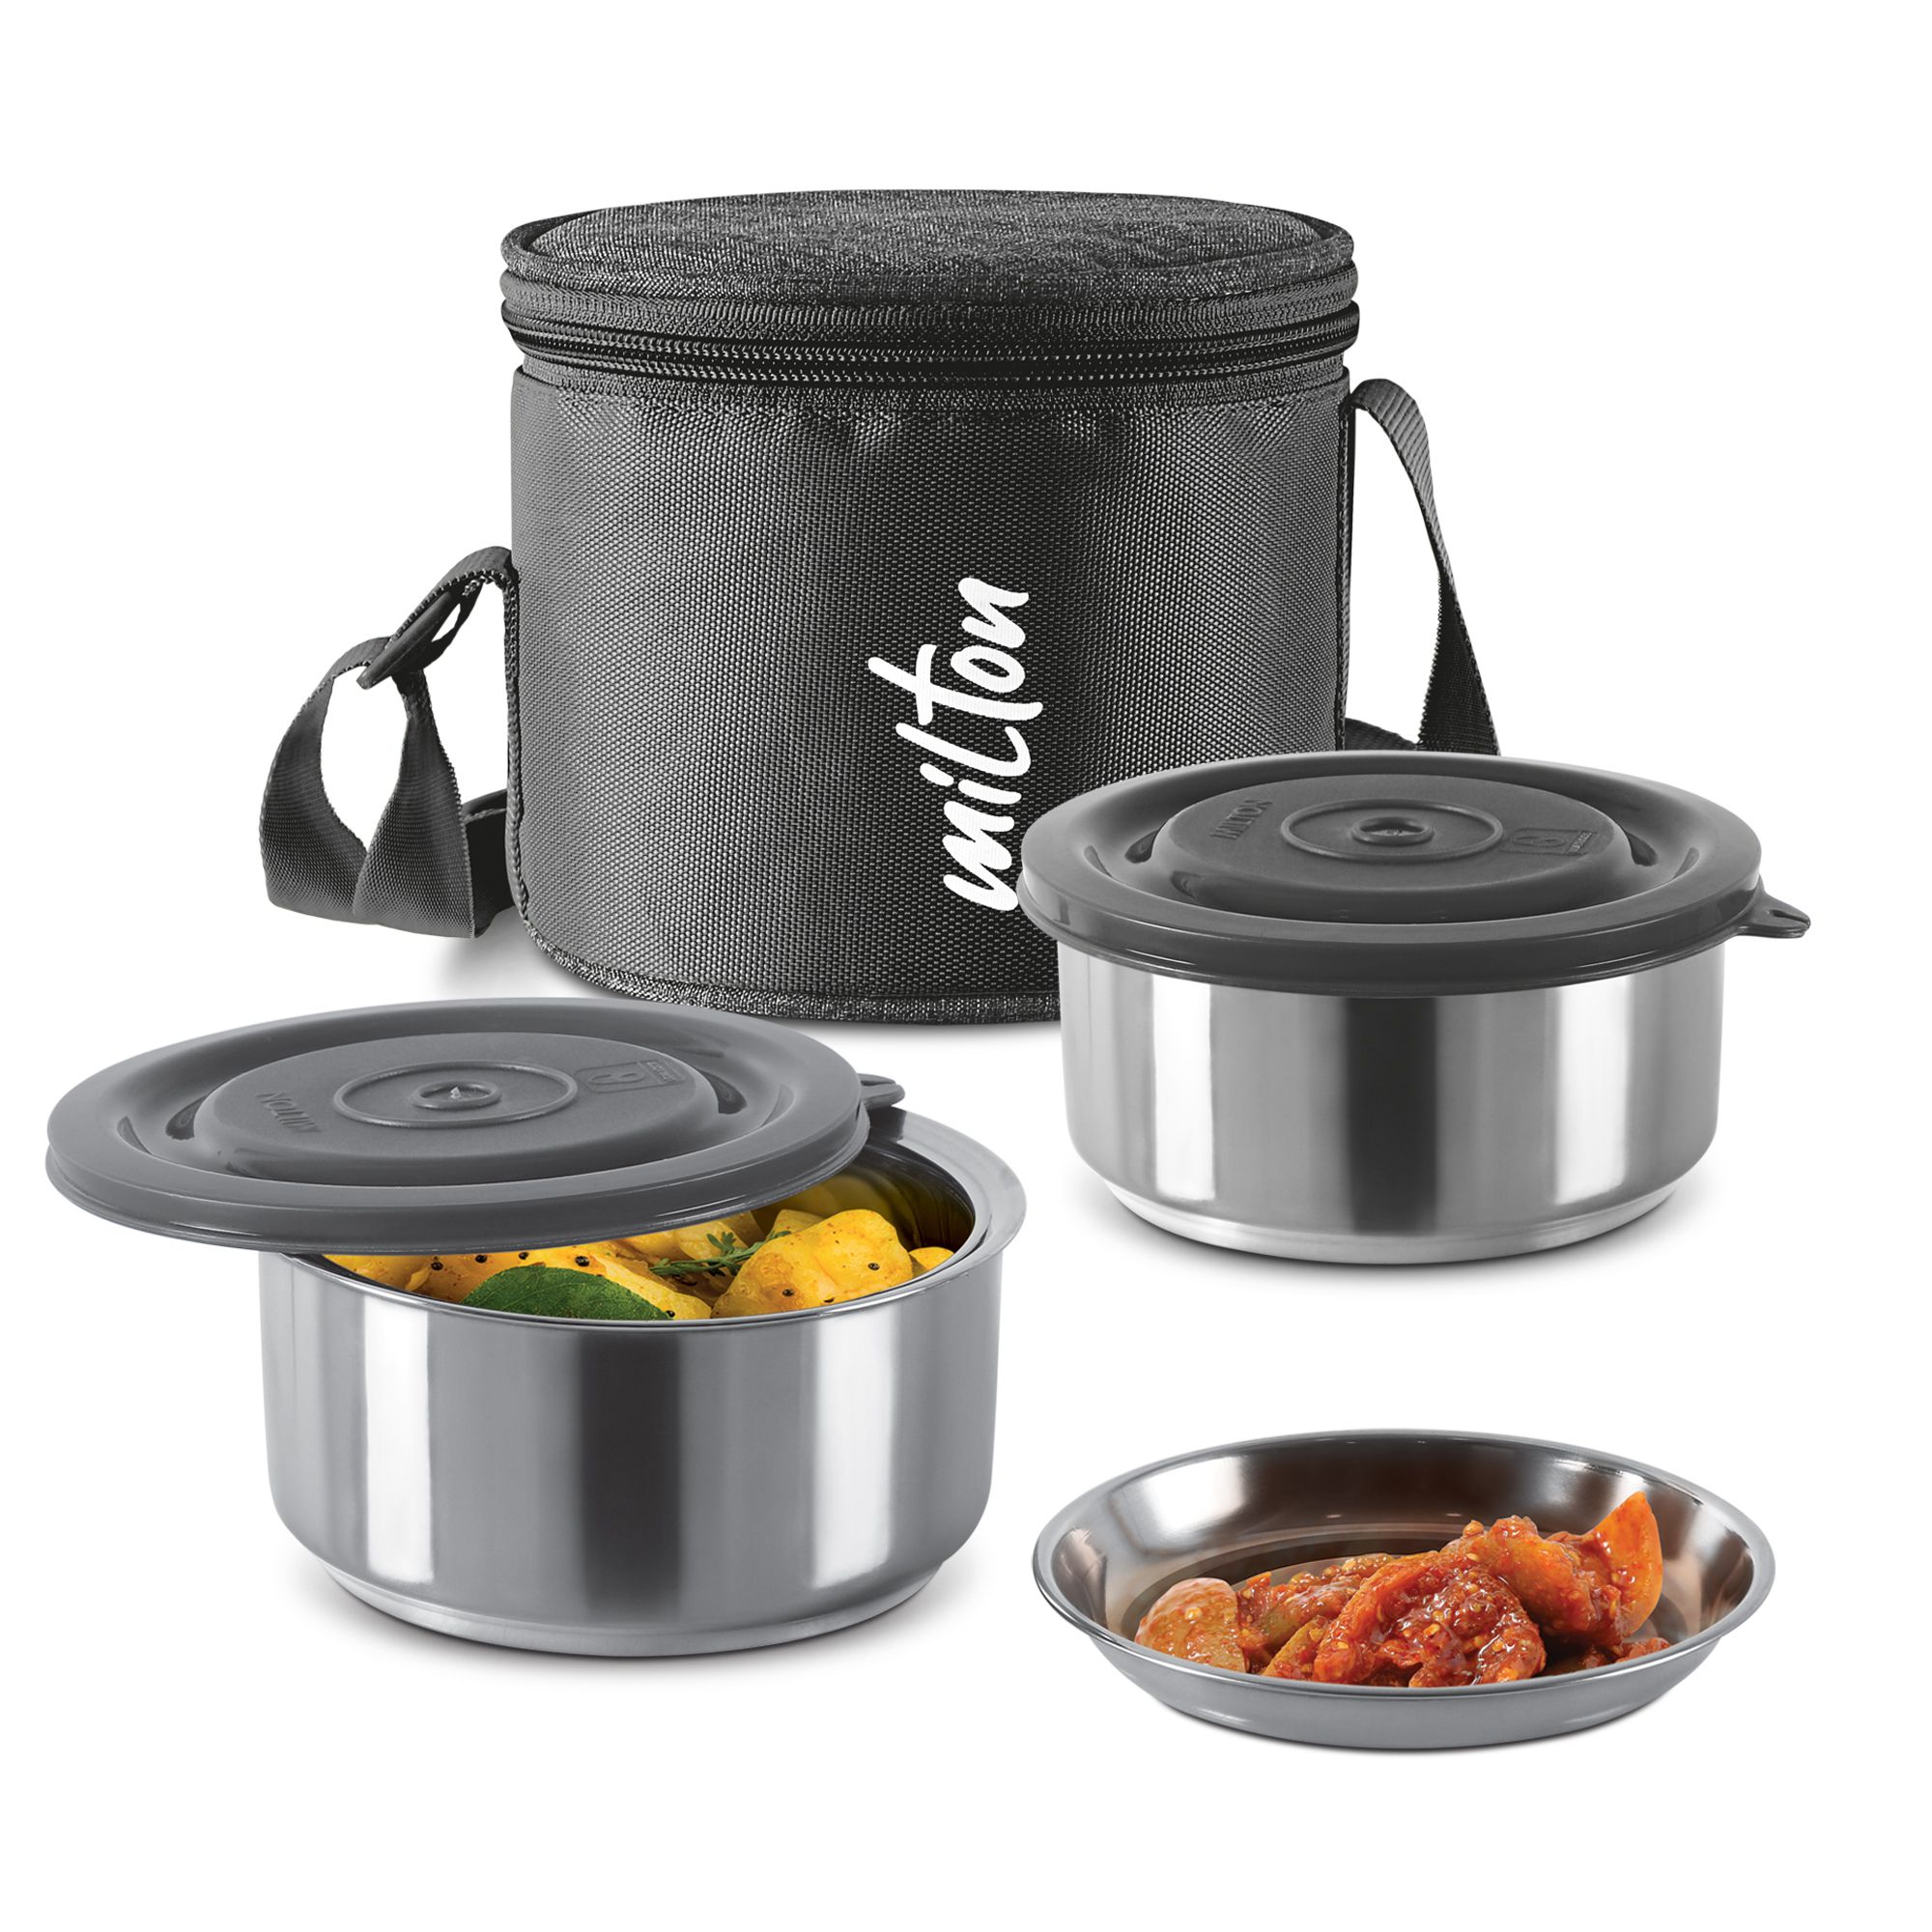     			Milton Ambition 2 Stainless Steel Tiffin, 2 Containers (300 ml Each with Jacket) Black